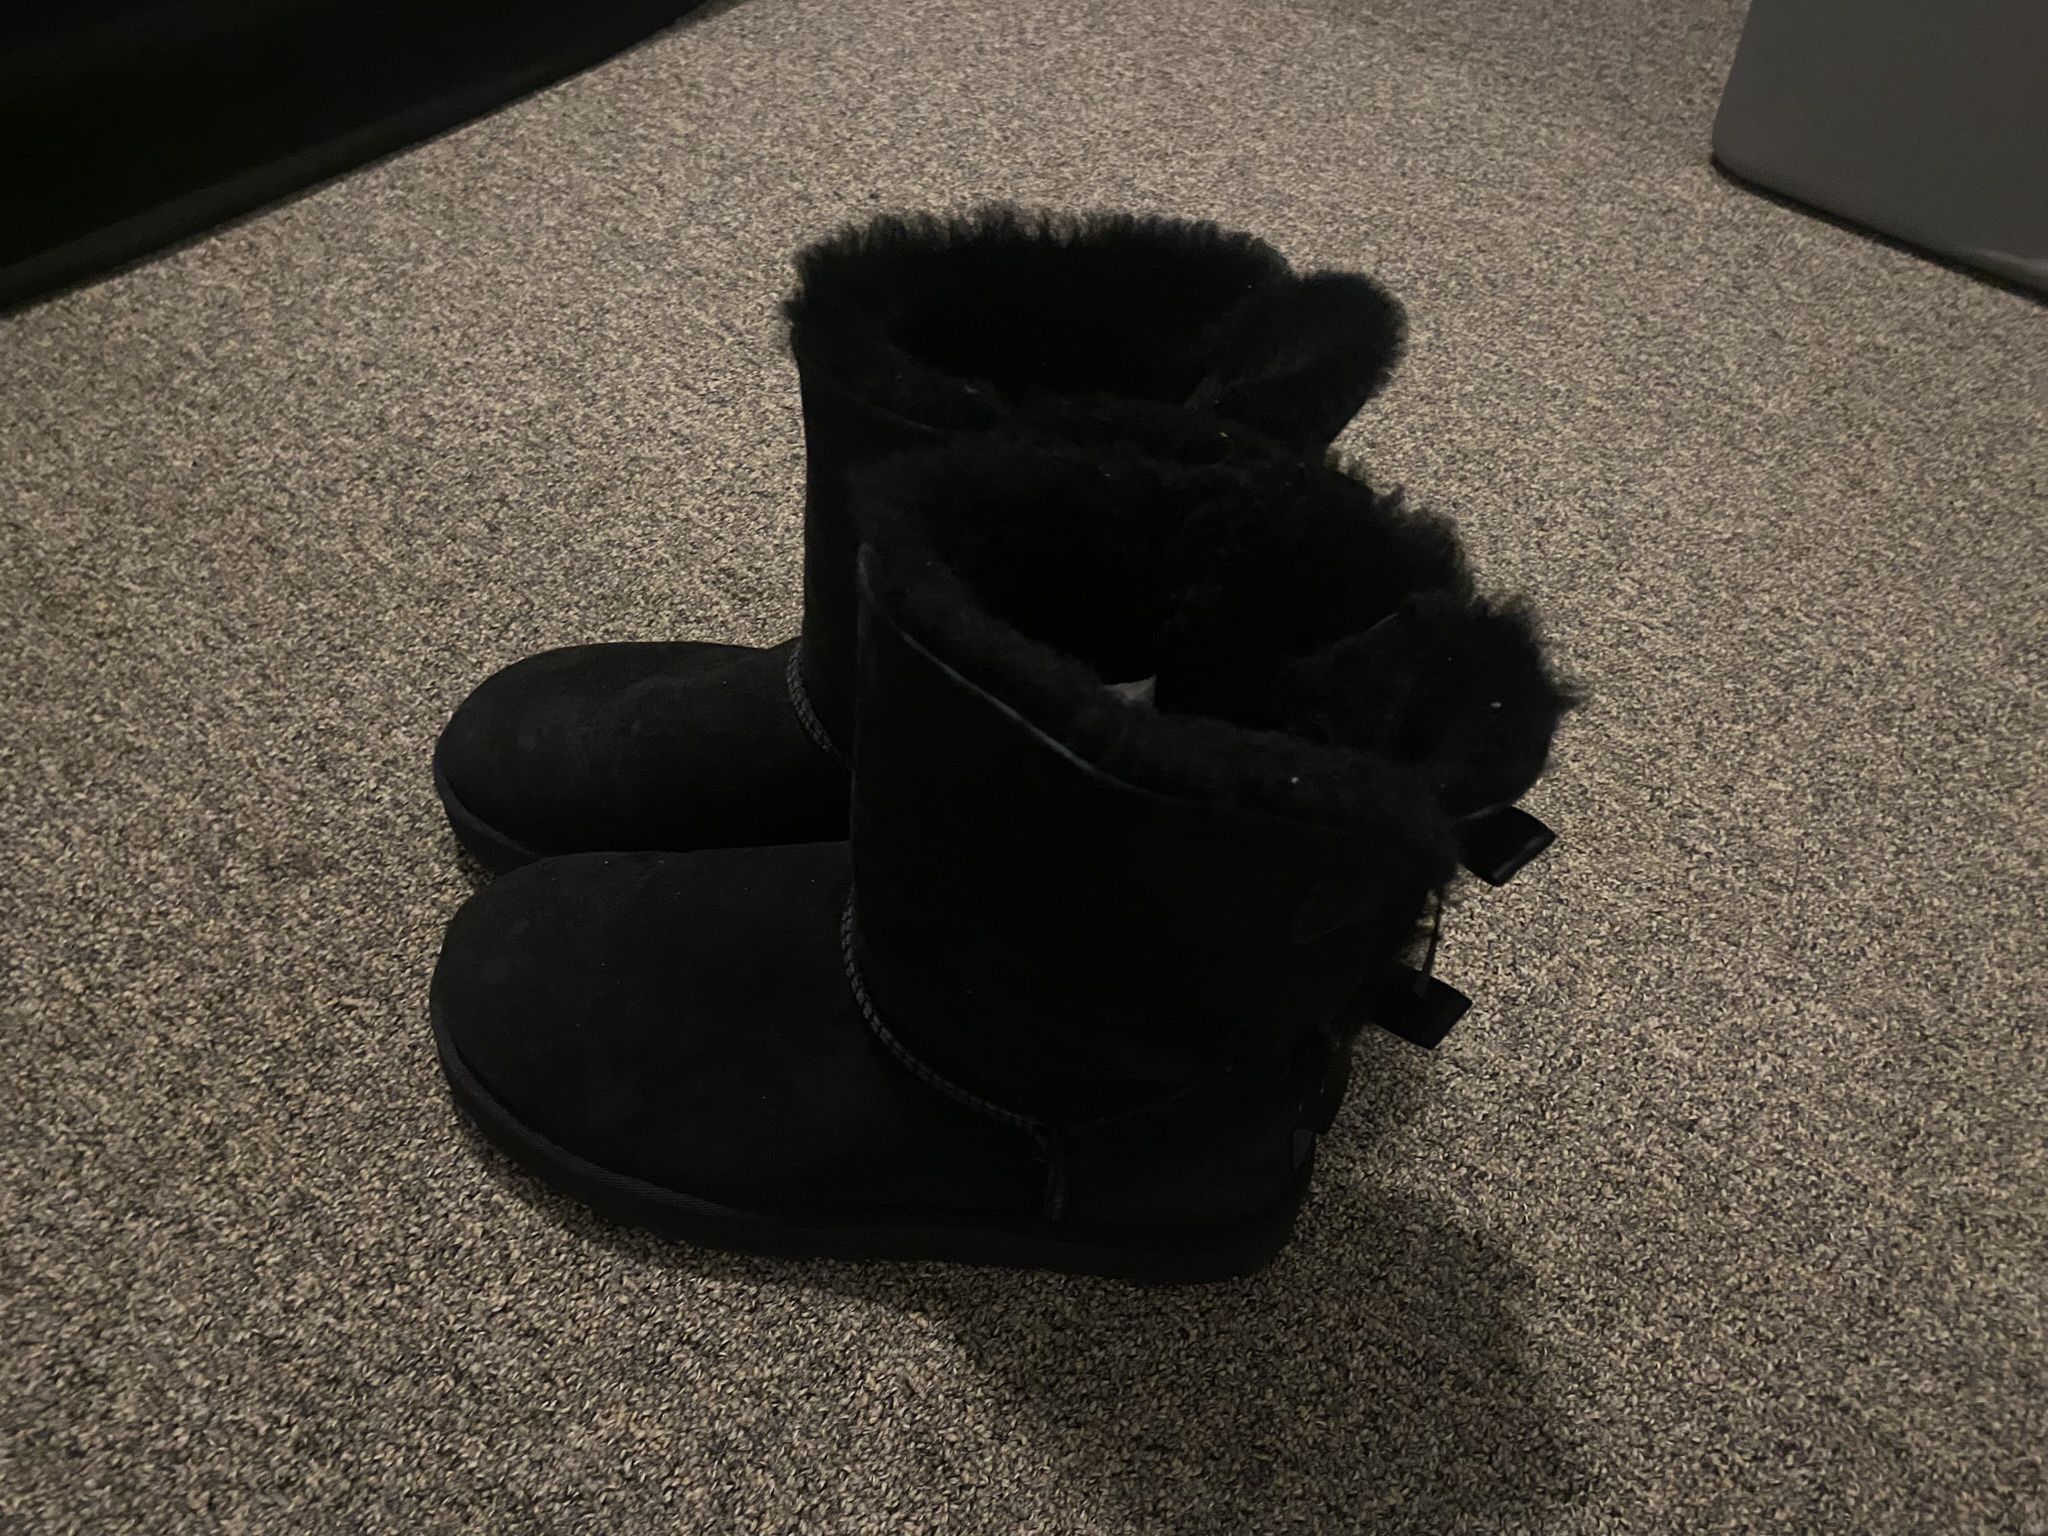 Women’s UGG Bailey Bow Boots Black